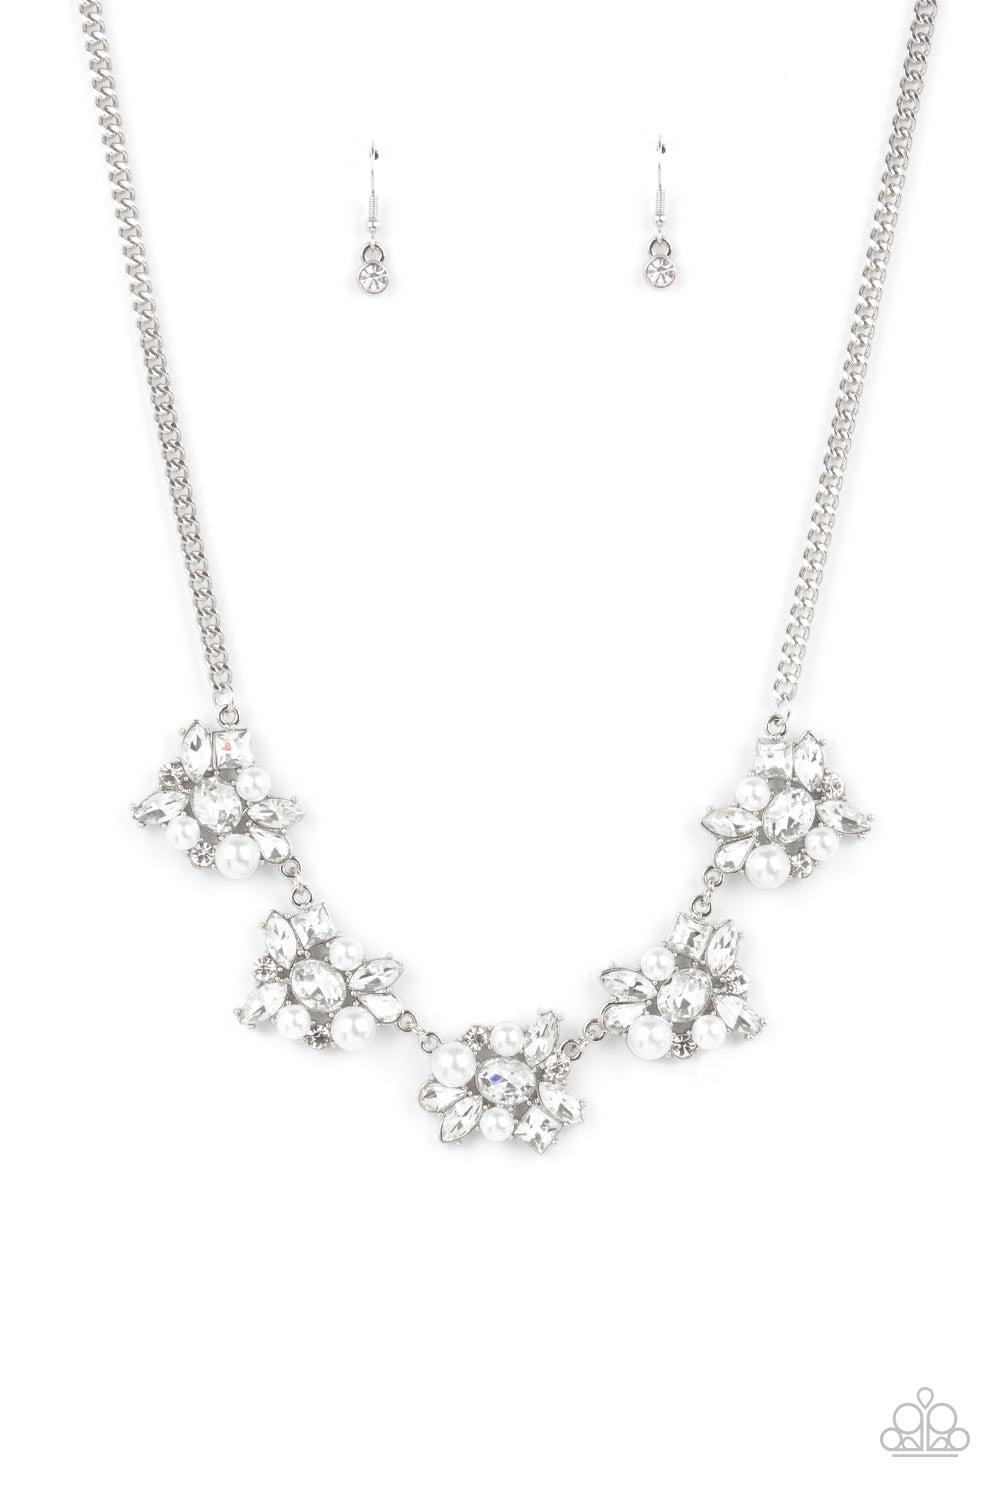 Paparazzi Accessories, white pearls and regally cut white rhinestones dangling on a dainty silver chain.